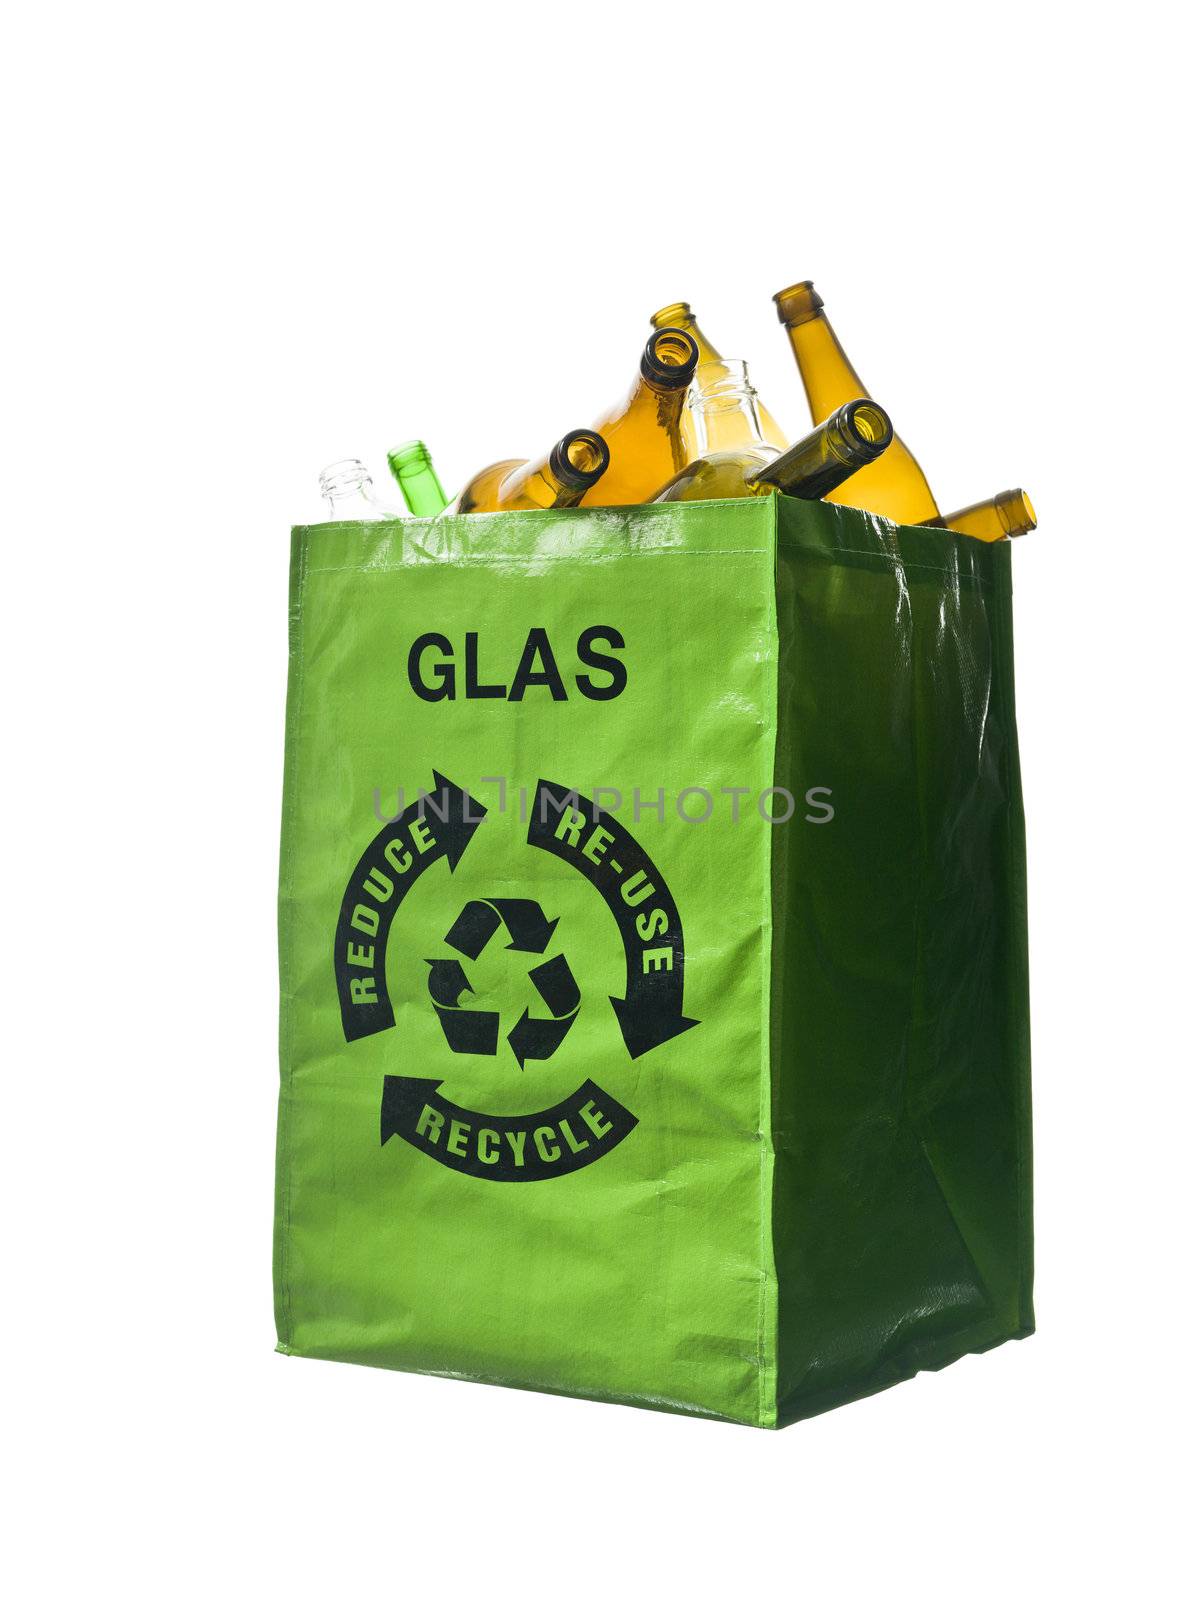 Green bag with glass recycling